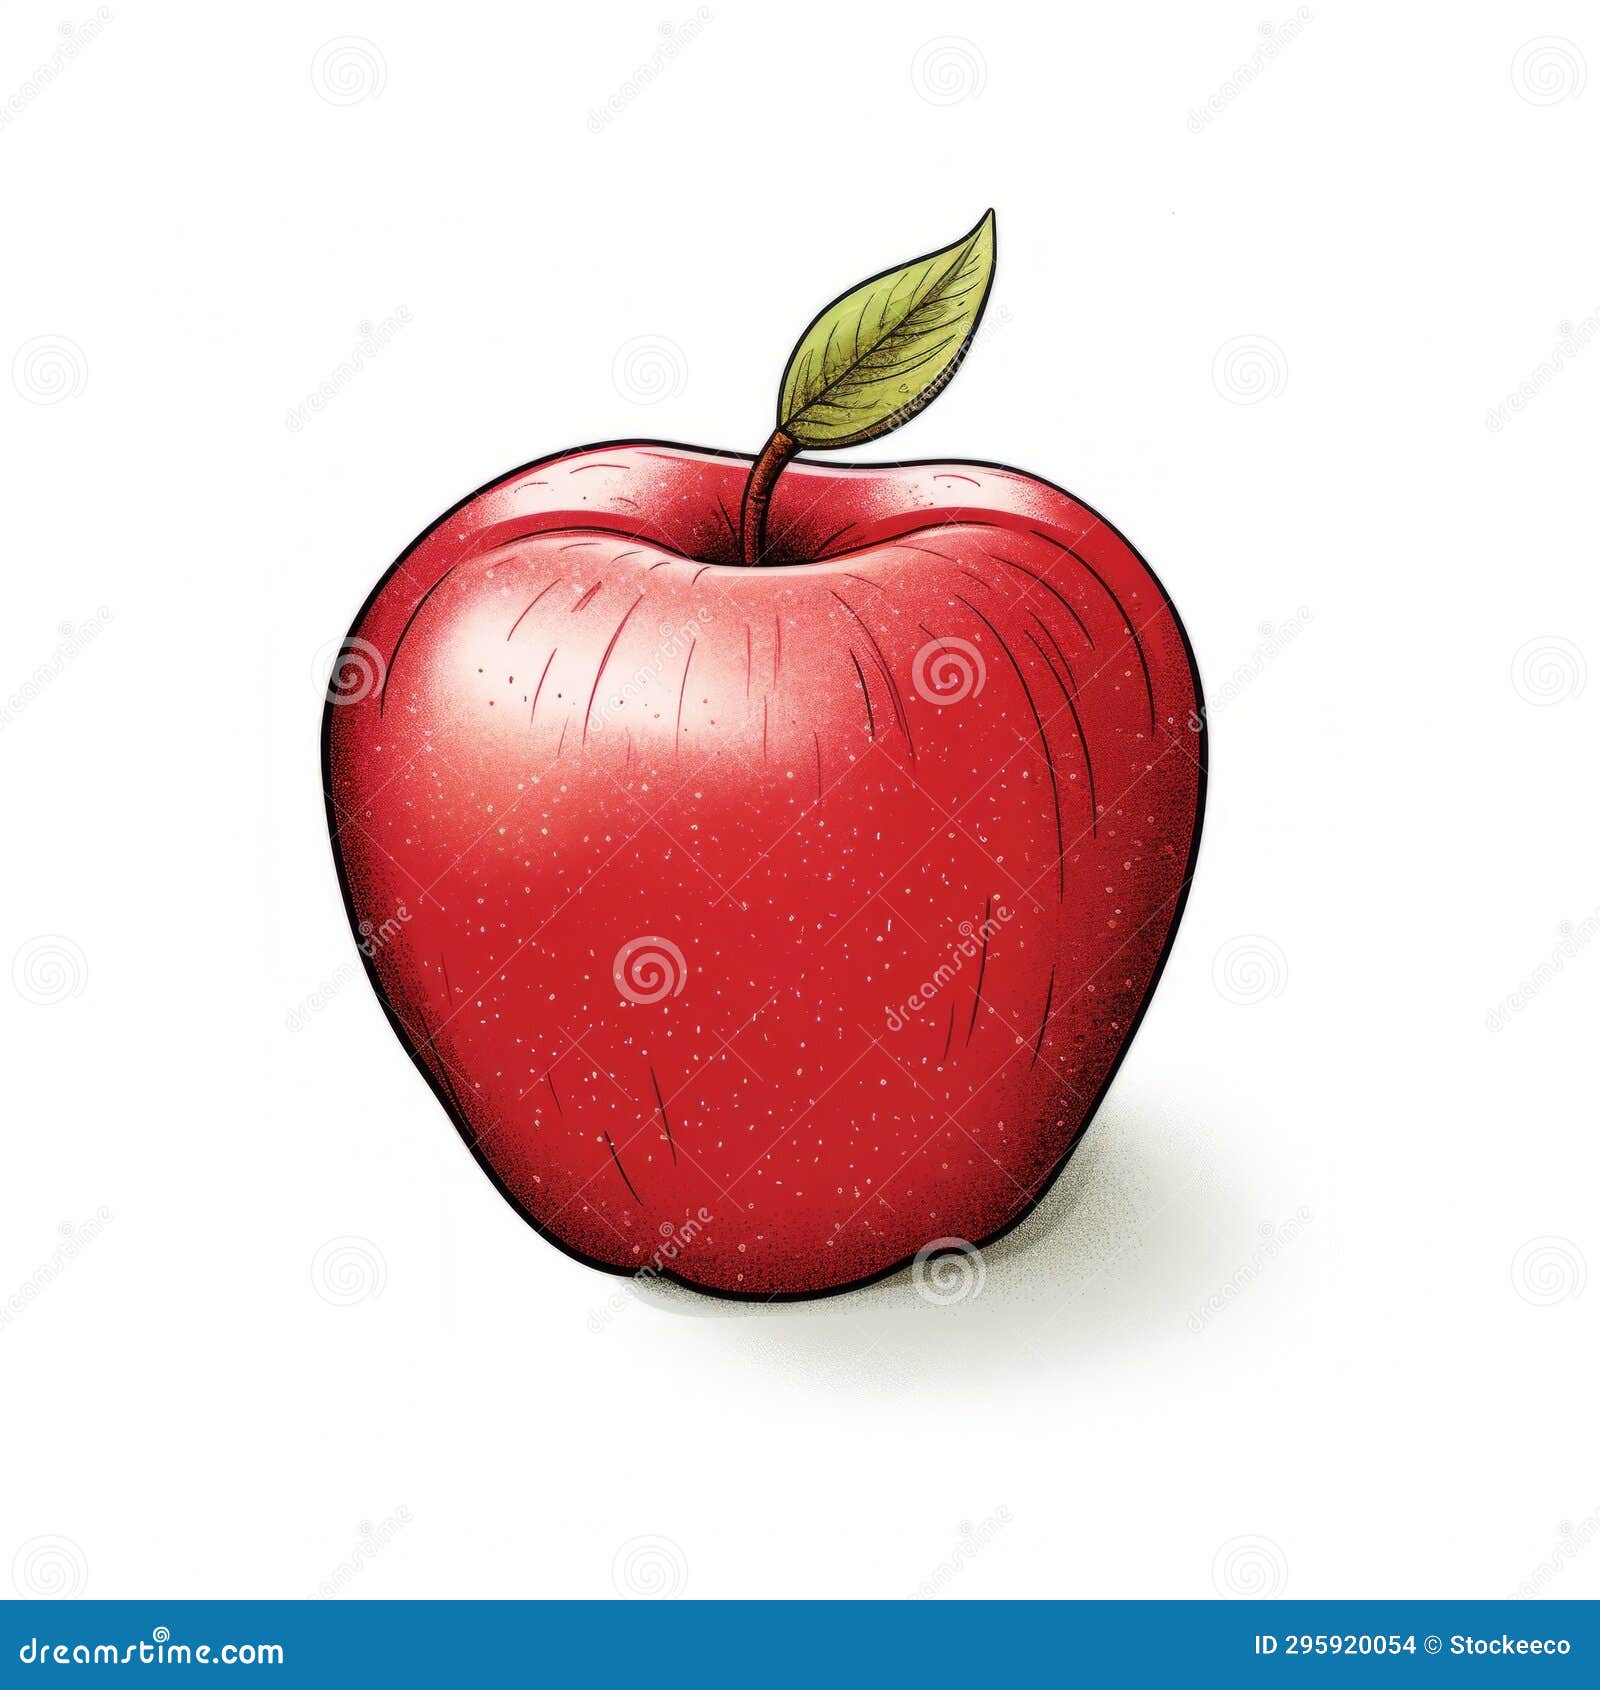 How To Draw An Apple | Color Pencil Tutorial - YouTube